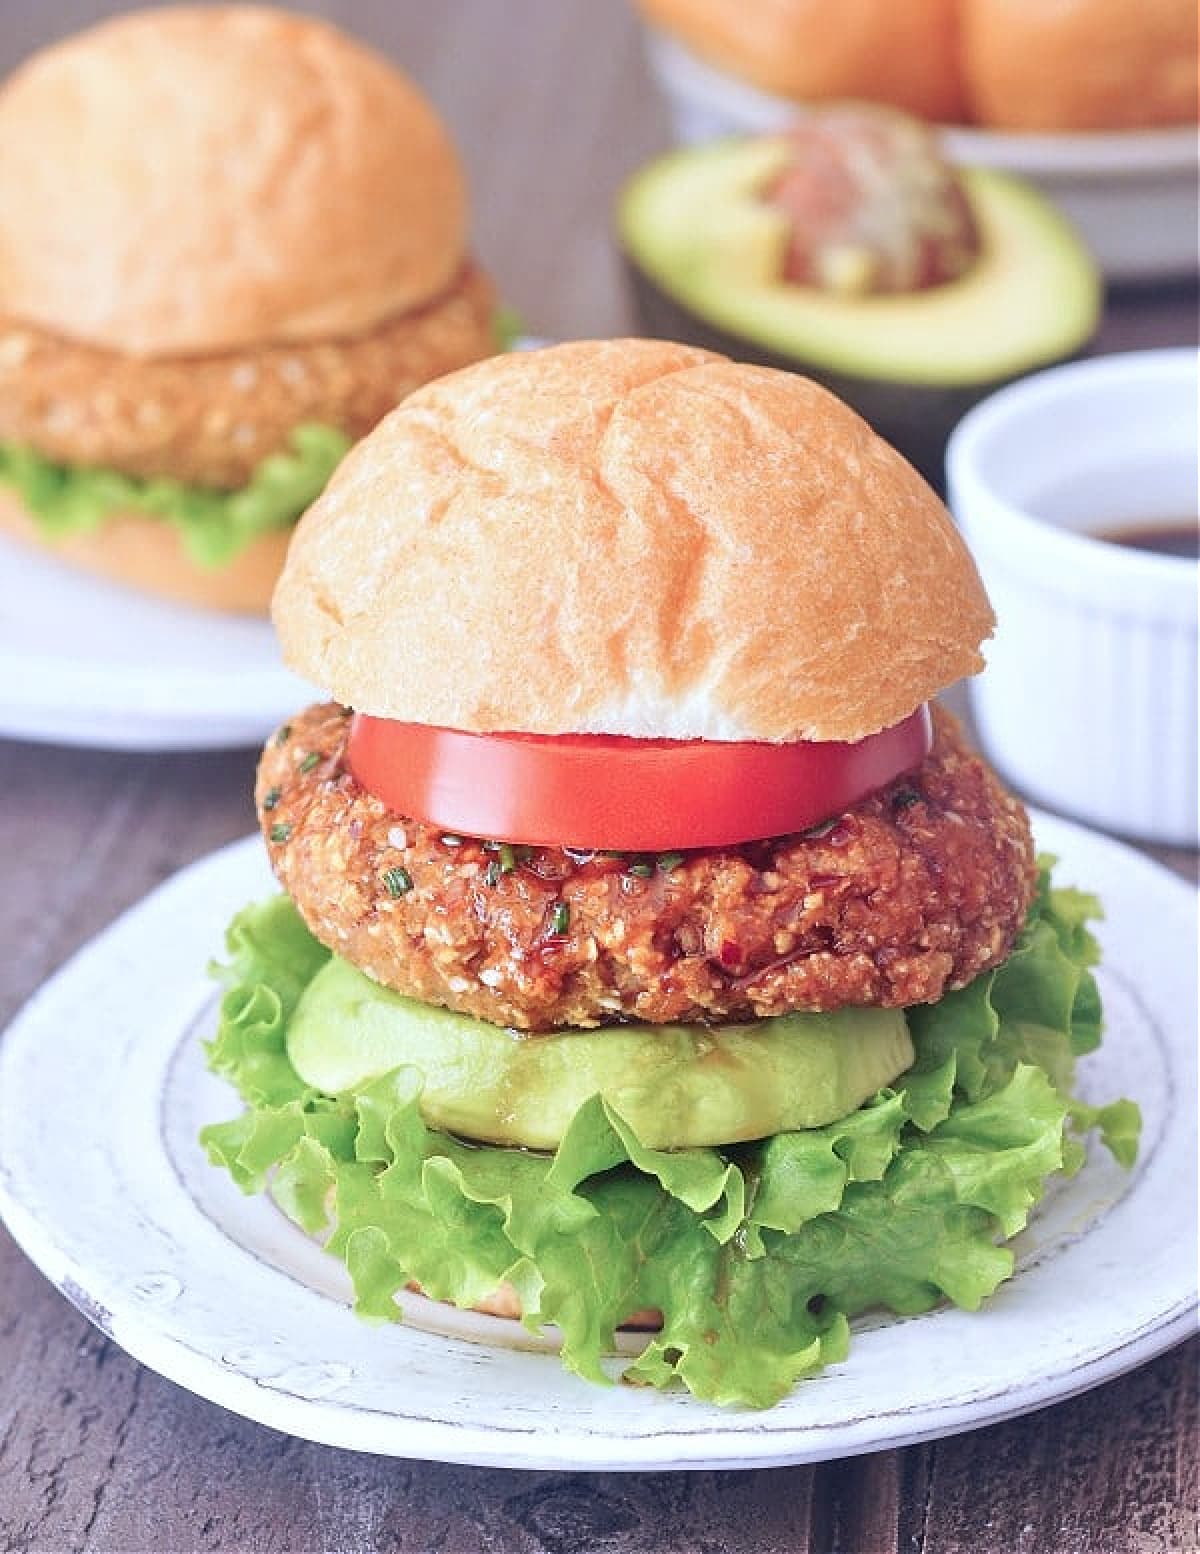 A ginger sesame teriyaki burger sitting on a bottom bun with lettuce, a thick slice of avocado, bright red slice of tomato, and top bun. More burgers, buns, and avocado in background.